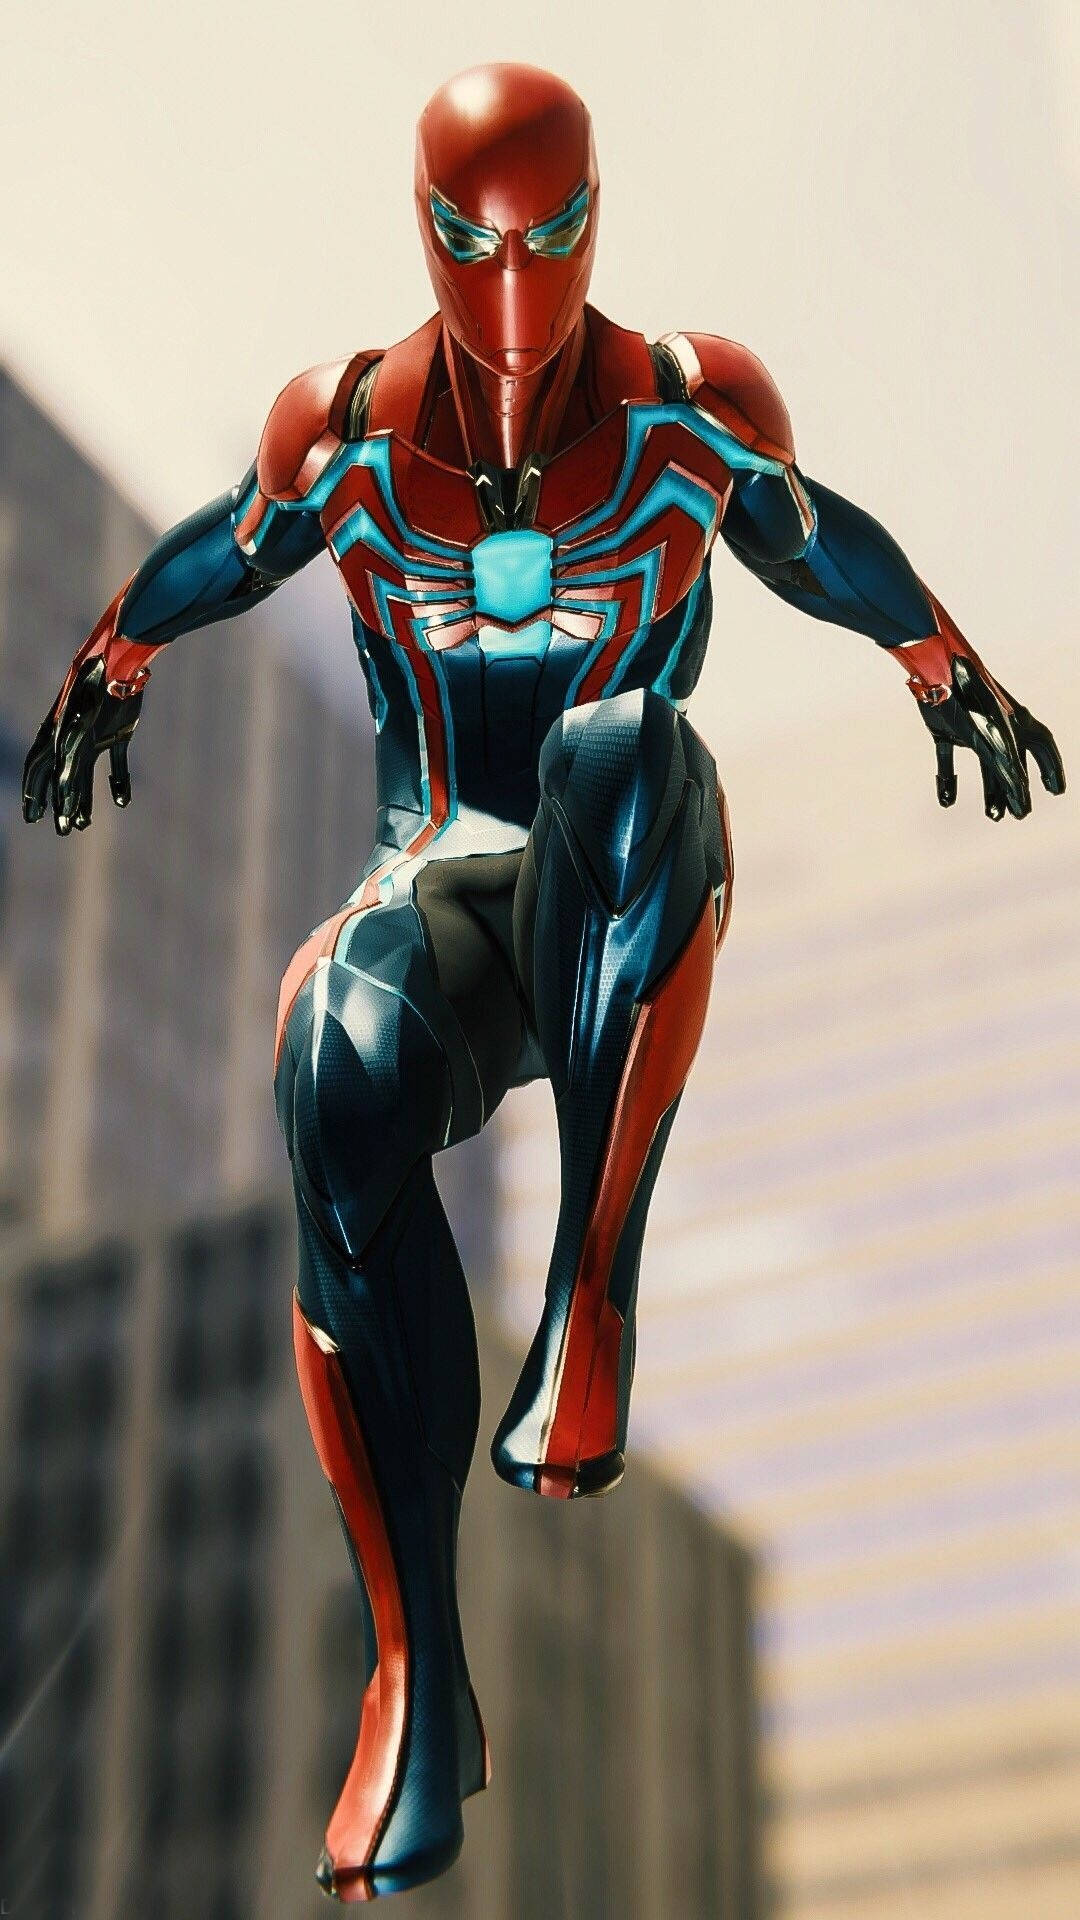 Iron Spider Spider-man Far From Home 2019 4K Ultra HD Mobile Wallpaper